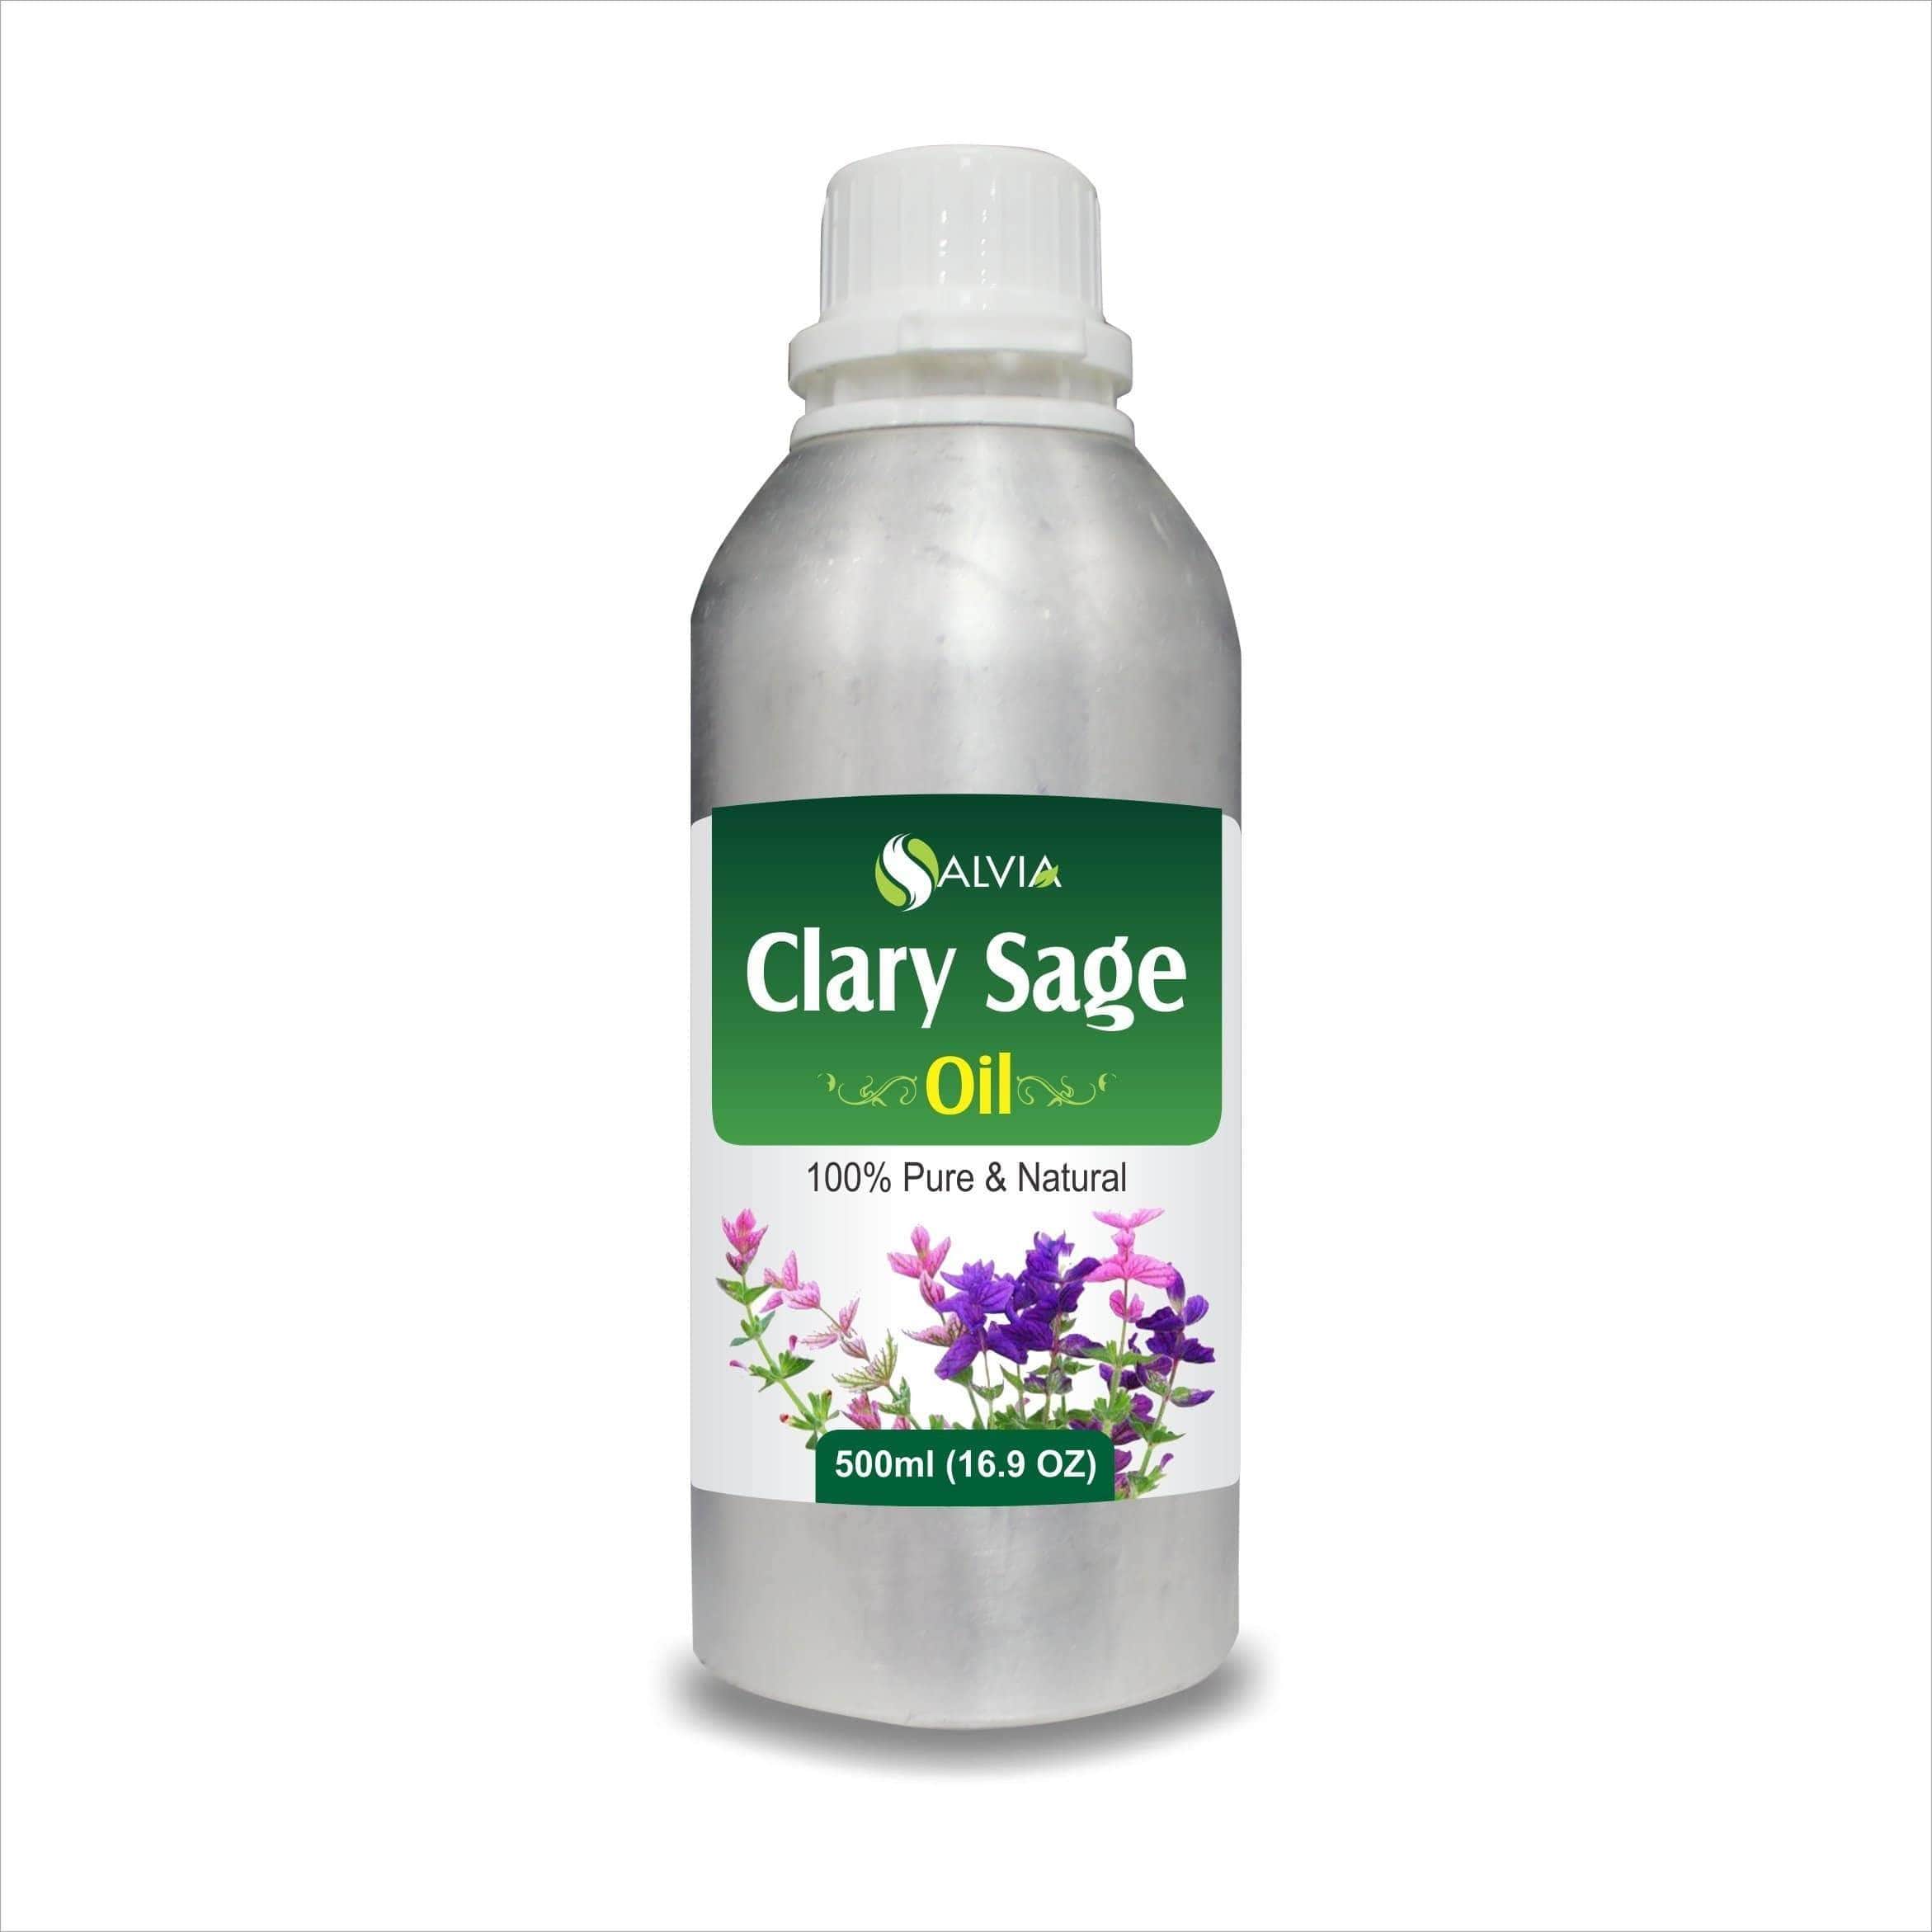 clary sage oil for hair